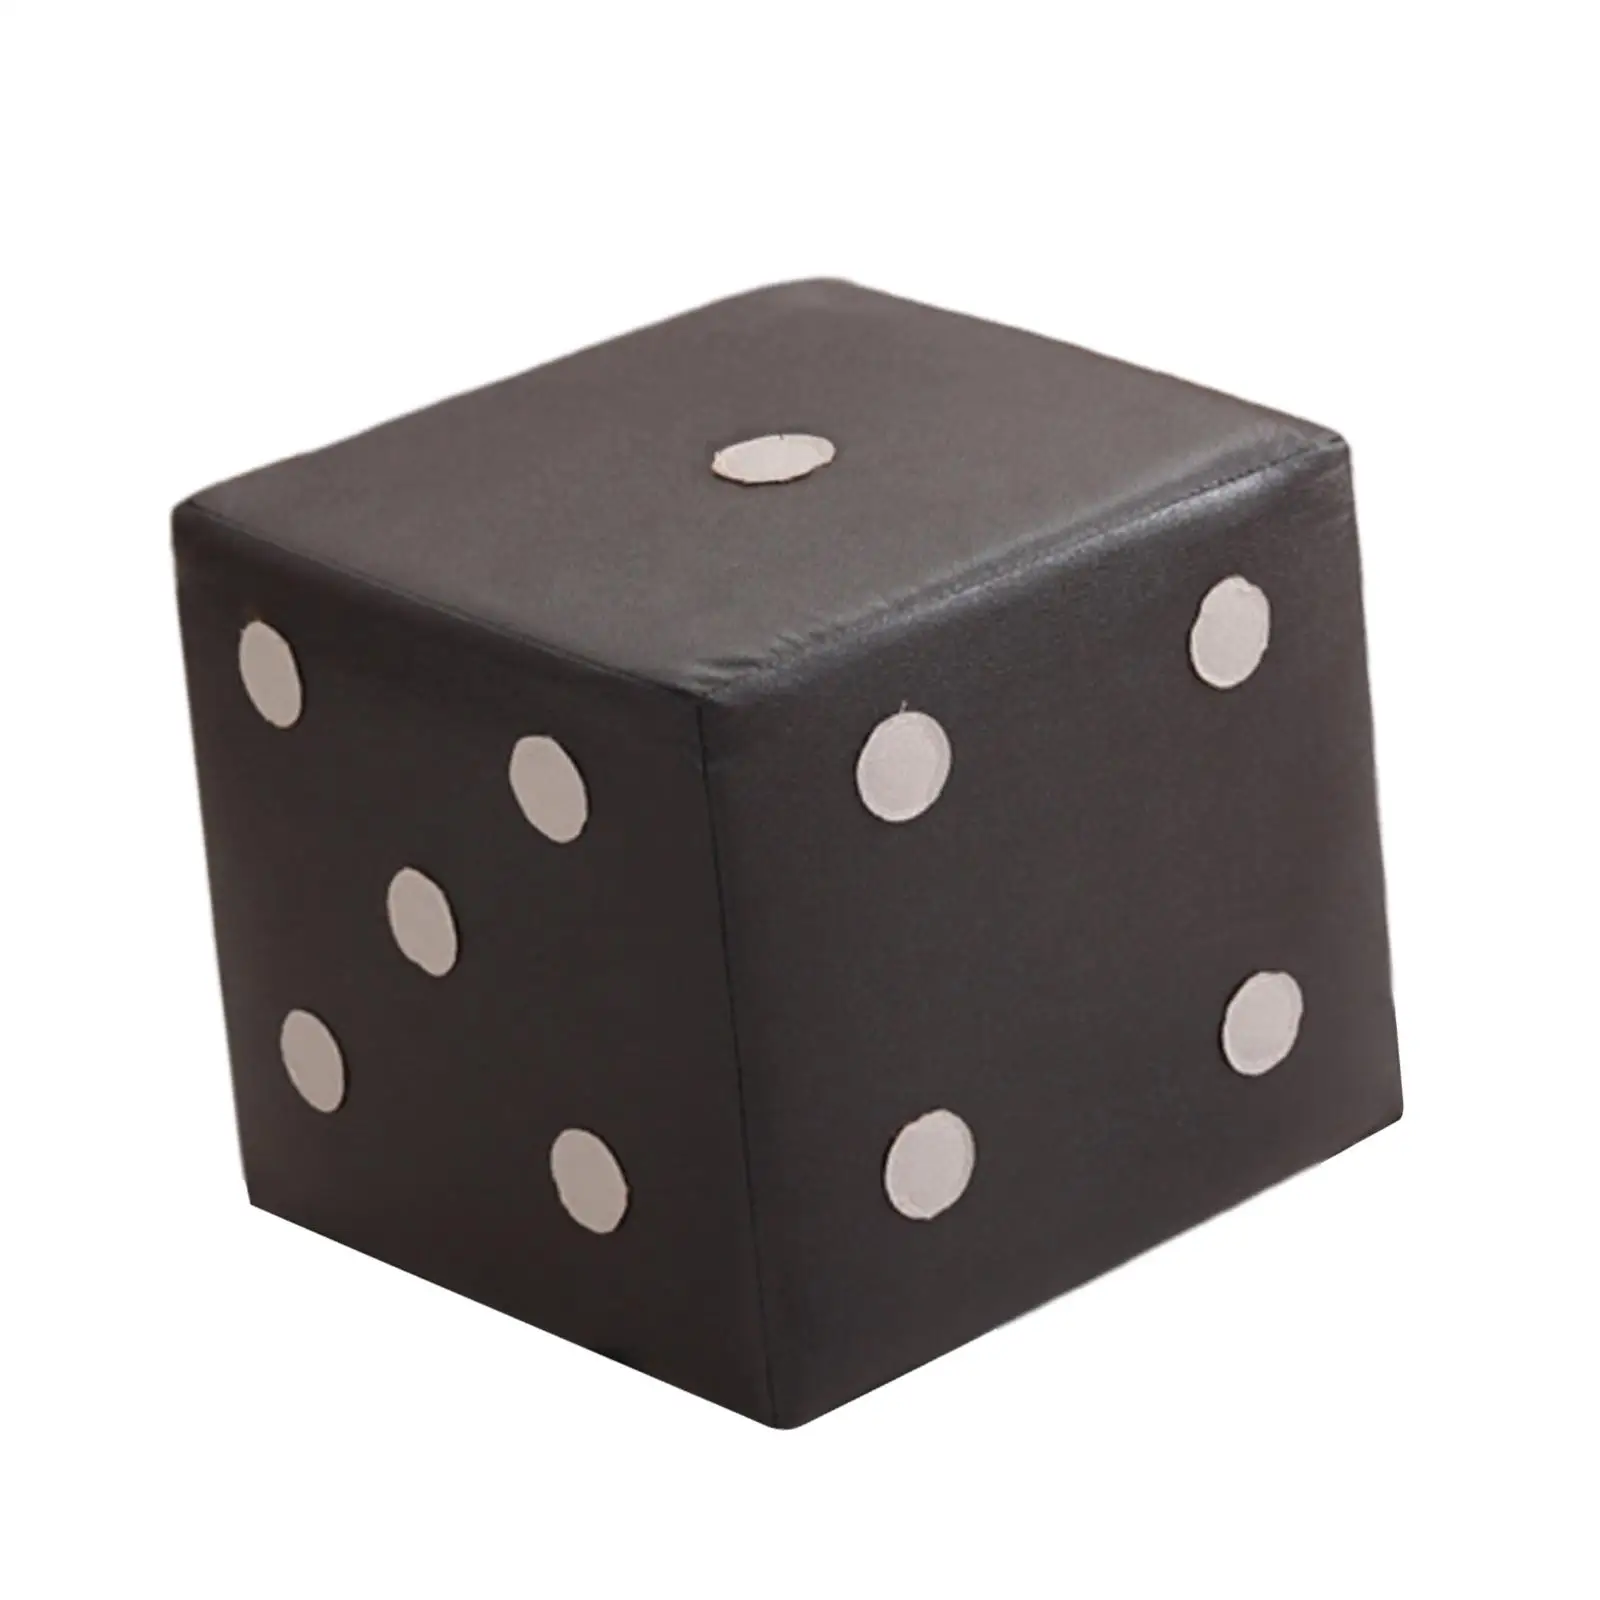 Small Footrest Unique Upholstered Stable Dice Patterns for Playroom Bedside